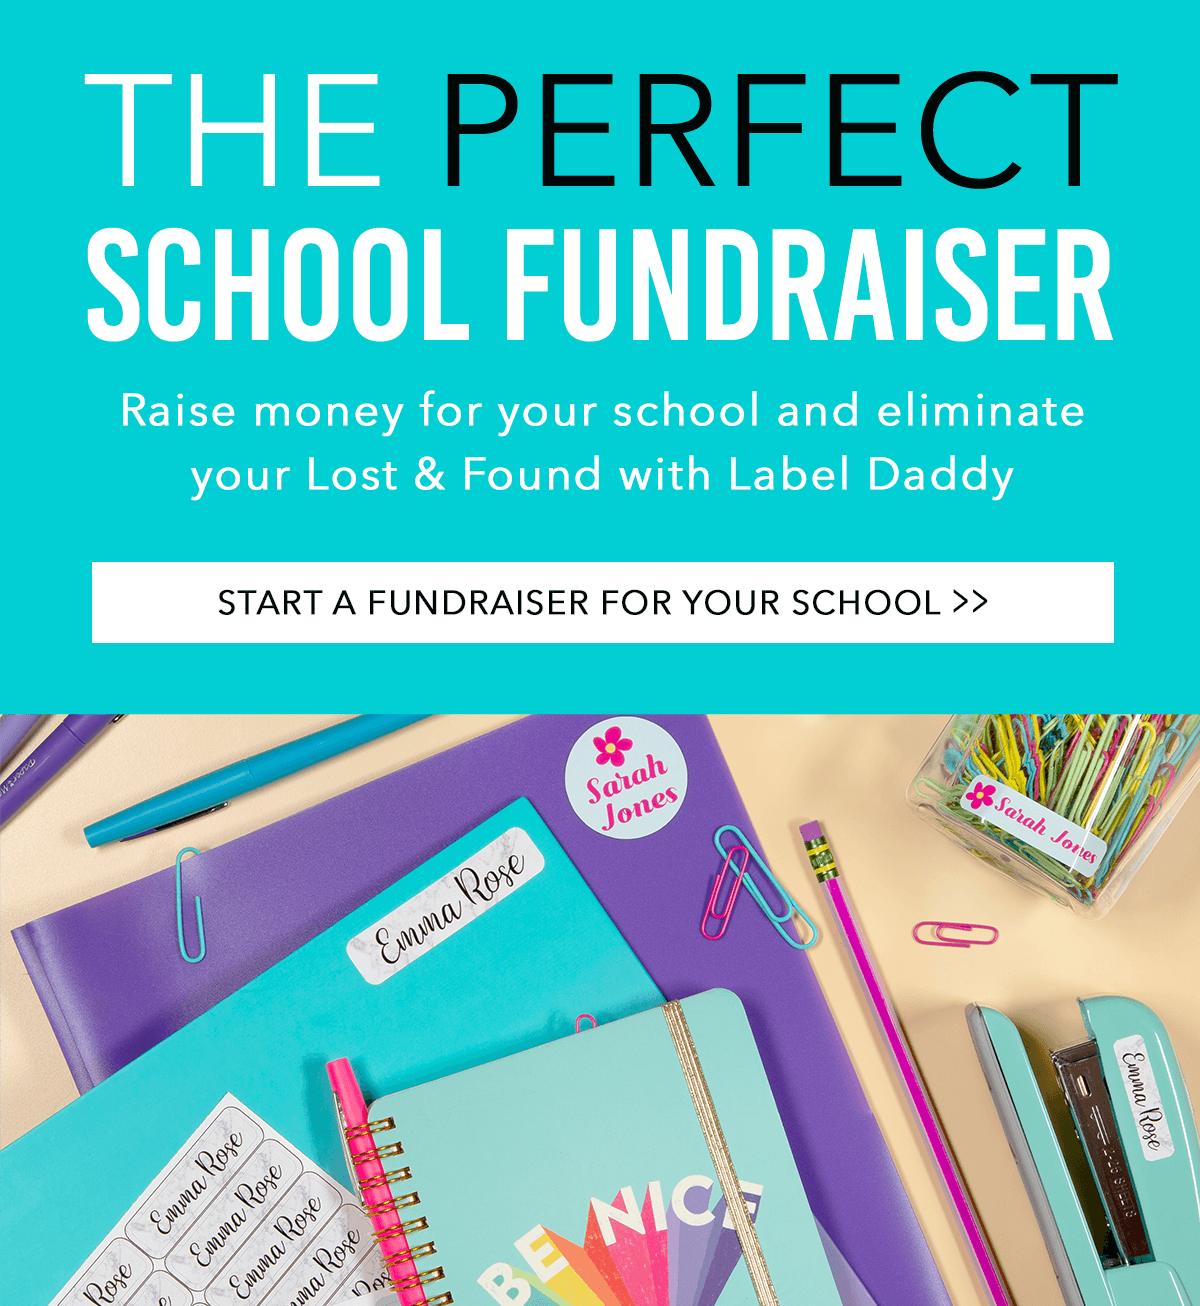 Fundraise with Label Daddy! Click here to learn more!